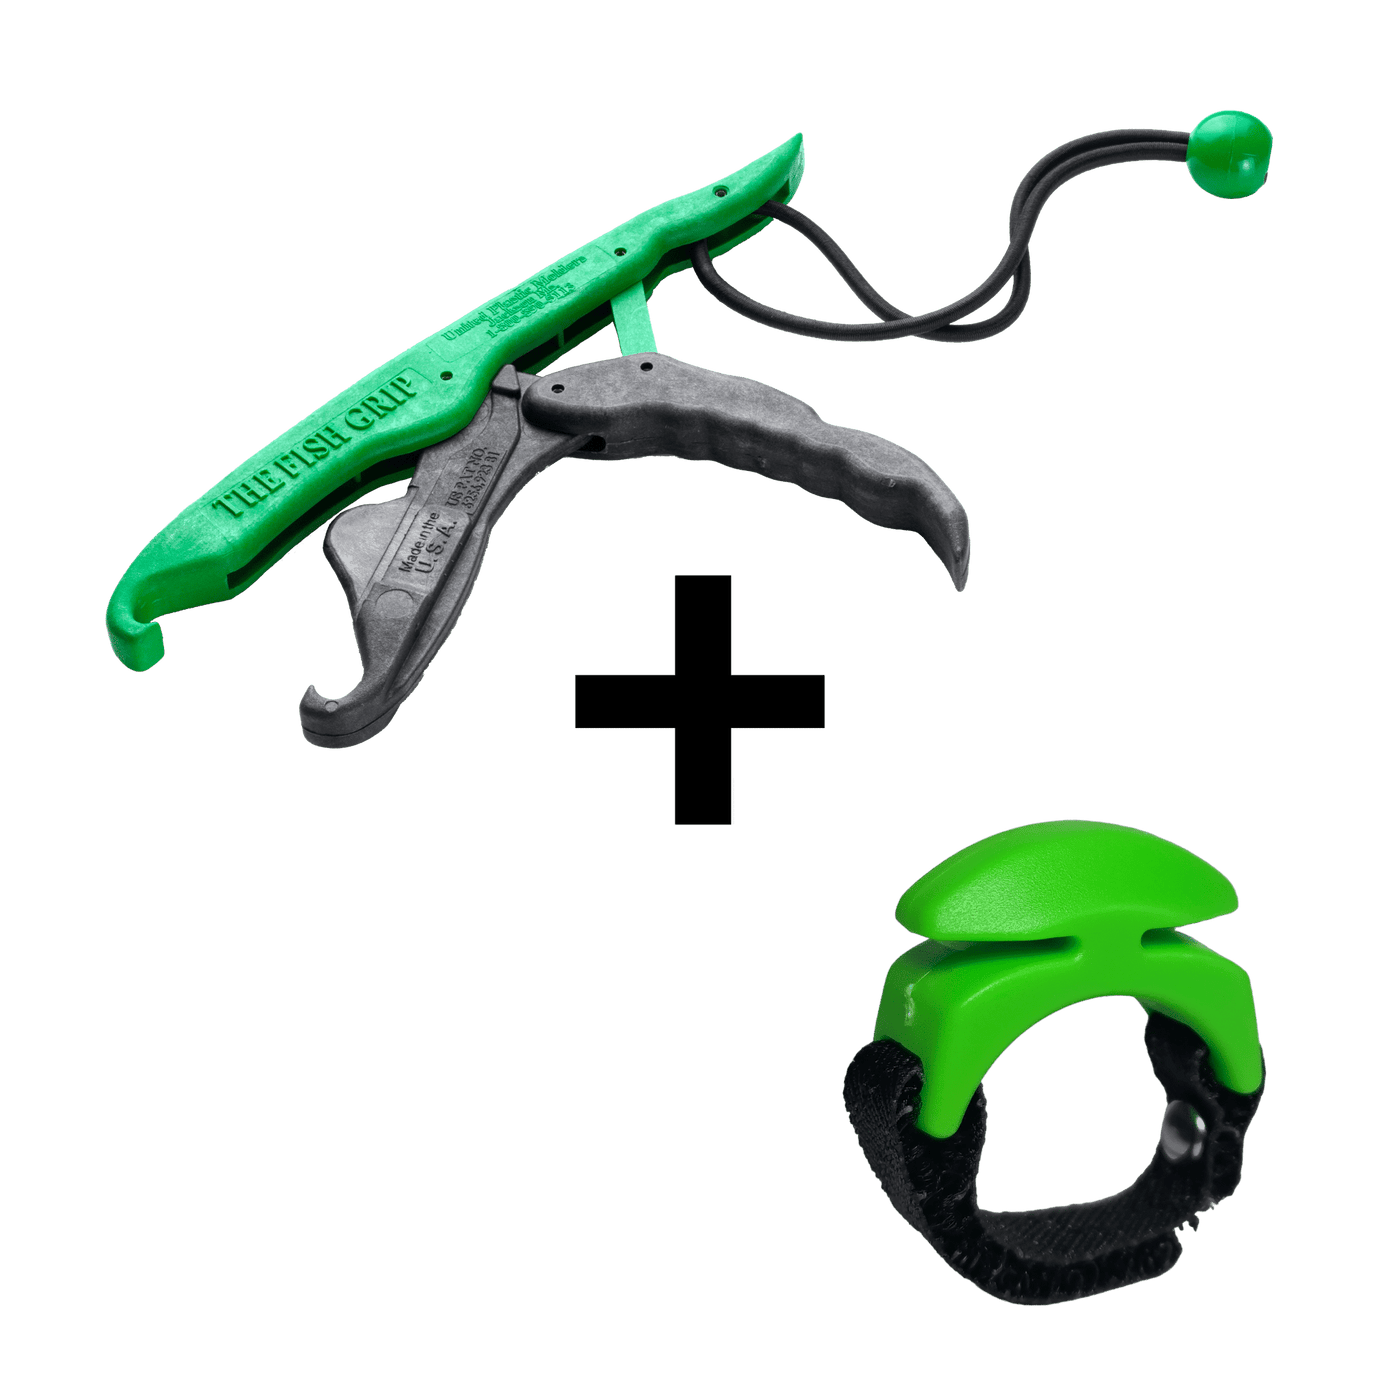 COMBO DEAL - Line Cutterz Ceramic Blade Ring + Lunker Tamers by The Fish Grip (Green) Combo Cutter Line Cutterz 